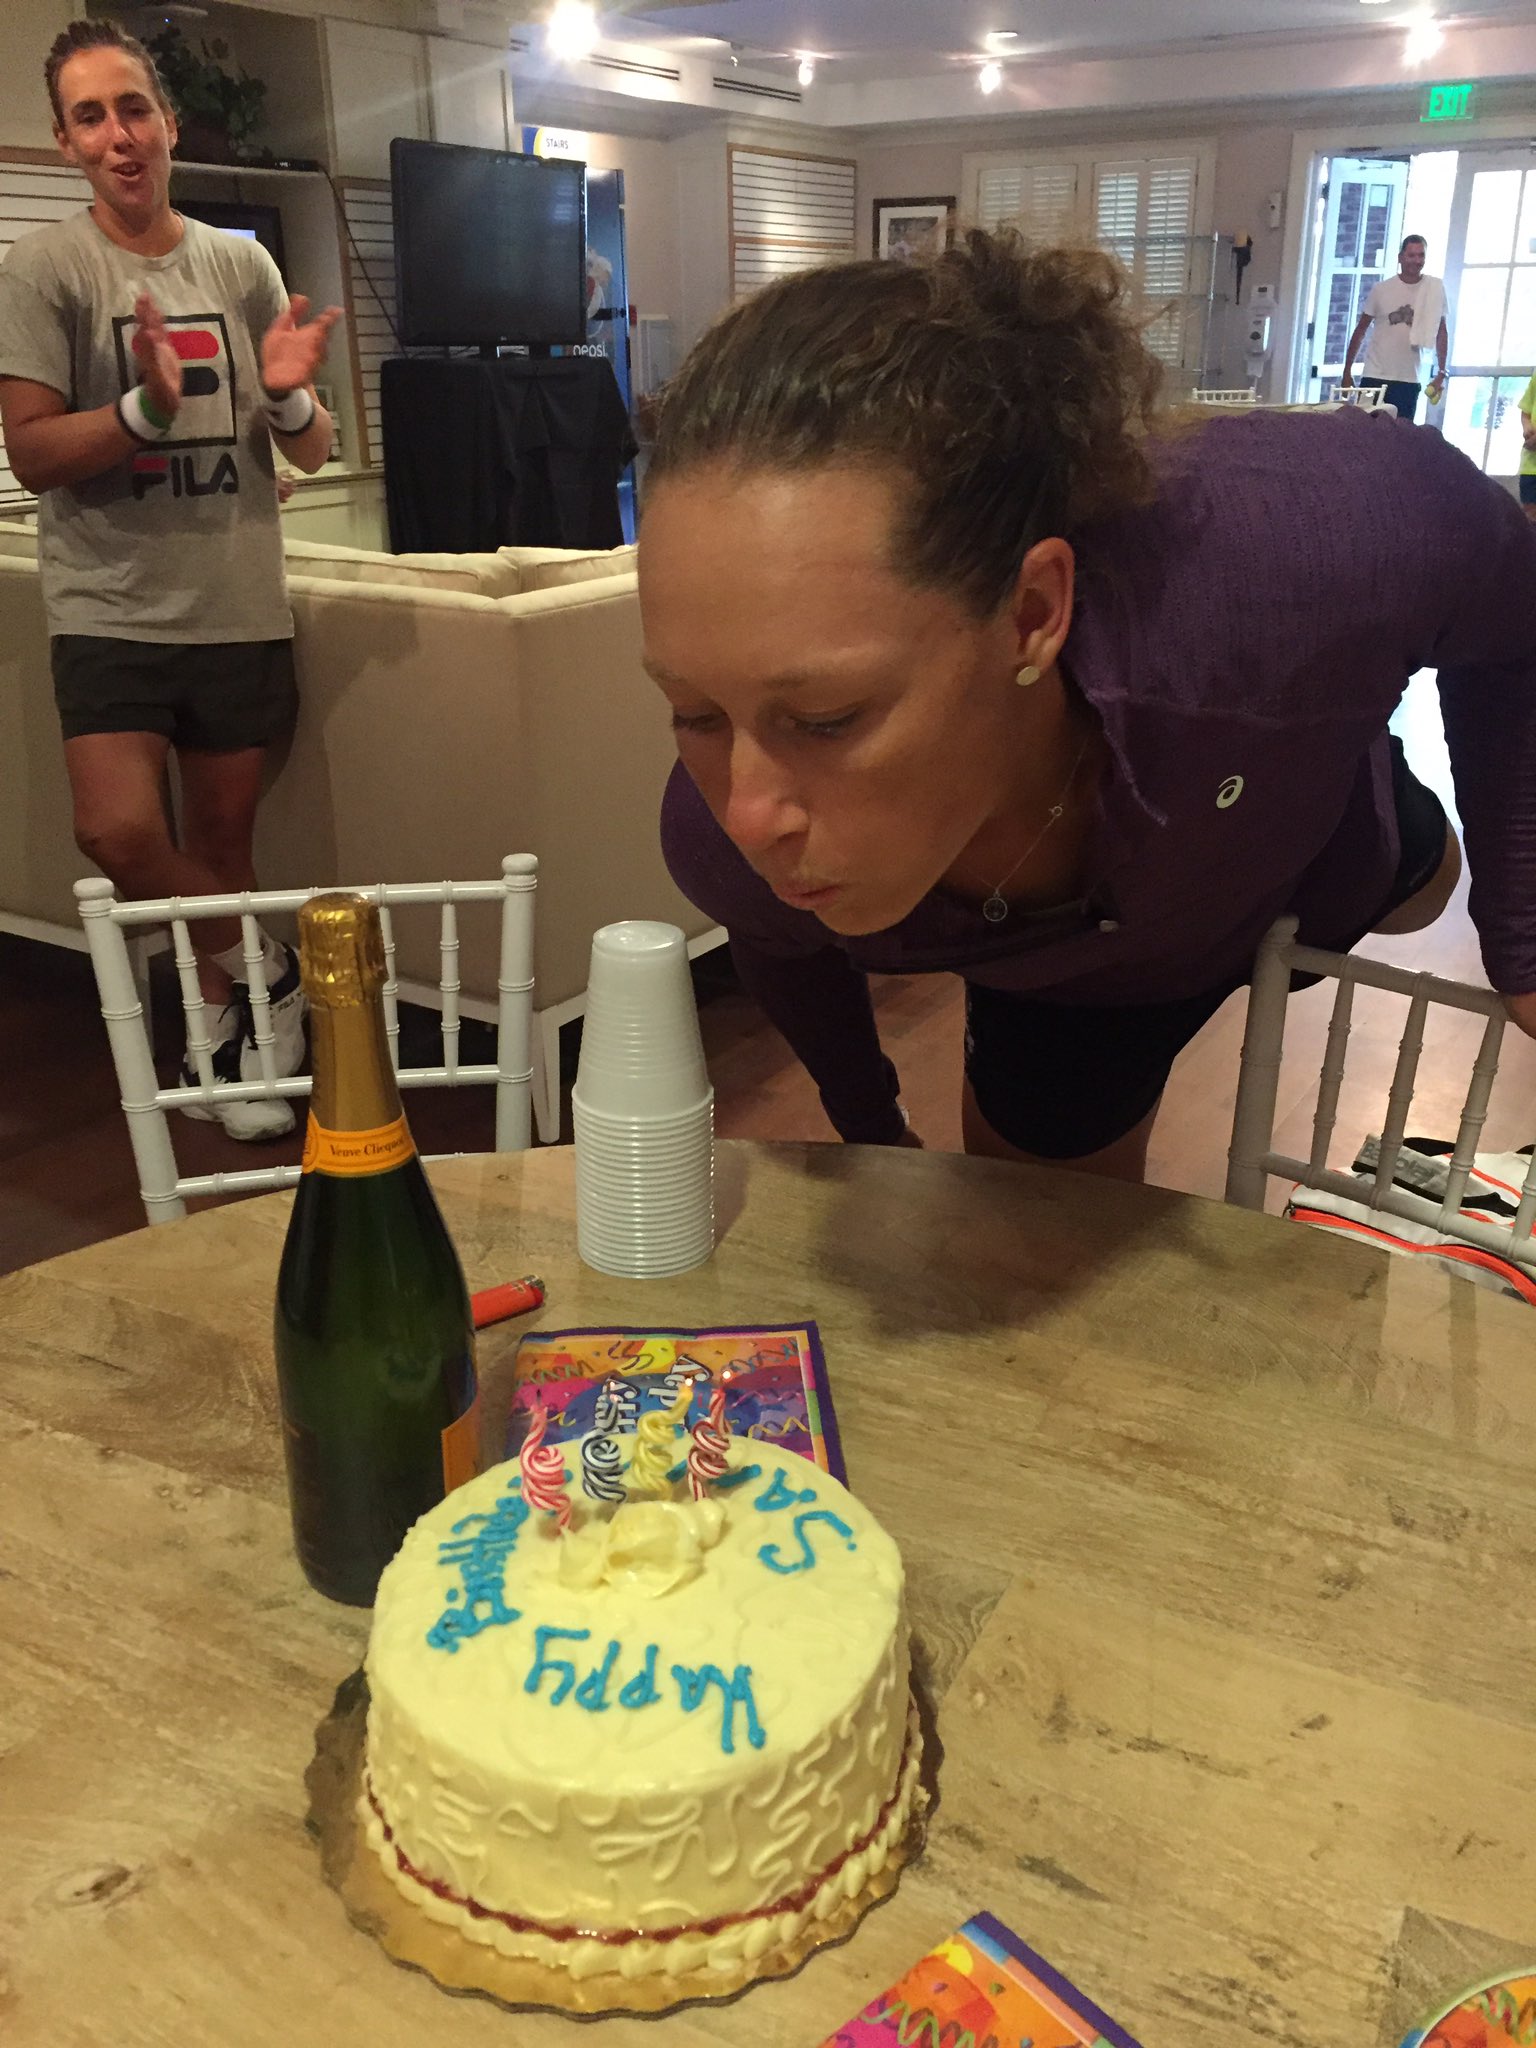 Wishing Samantha Stosur a happy birthday! Thanks for spending it with us each year!   